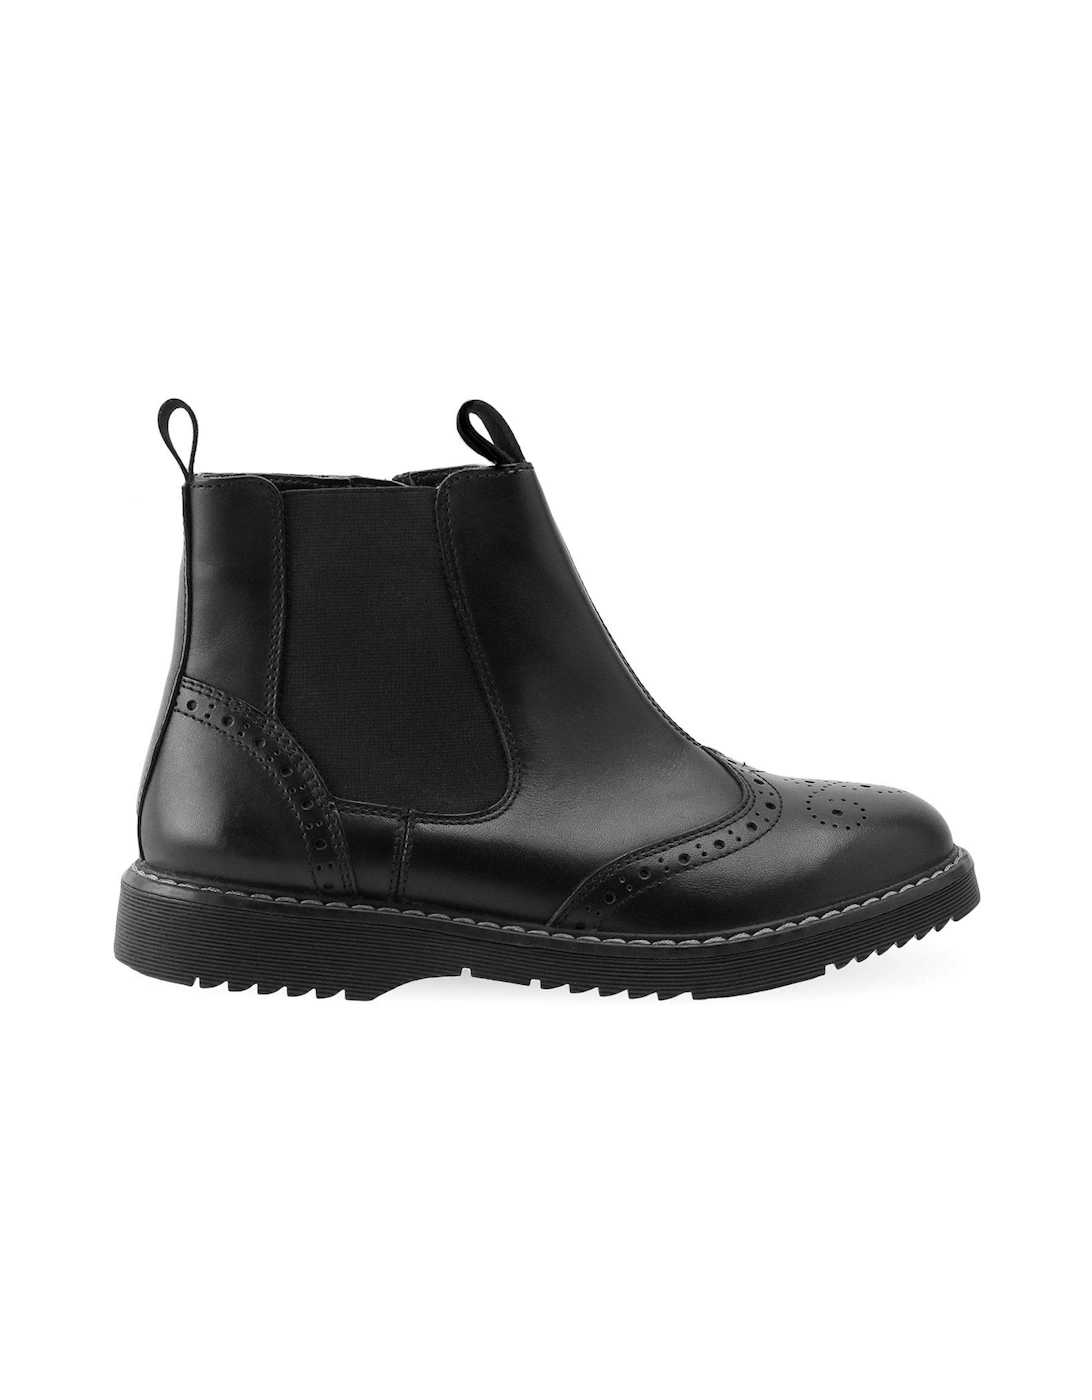 Revolution Girls Black Leather Zip Up Pull On Chelsea School Boots With Chunky Sole - Black, 2 of 1